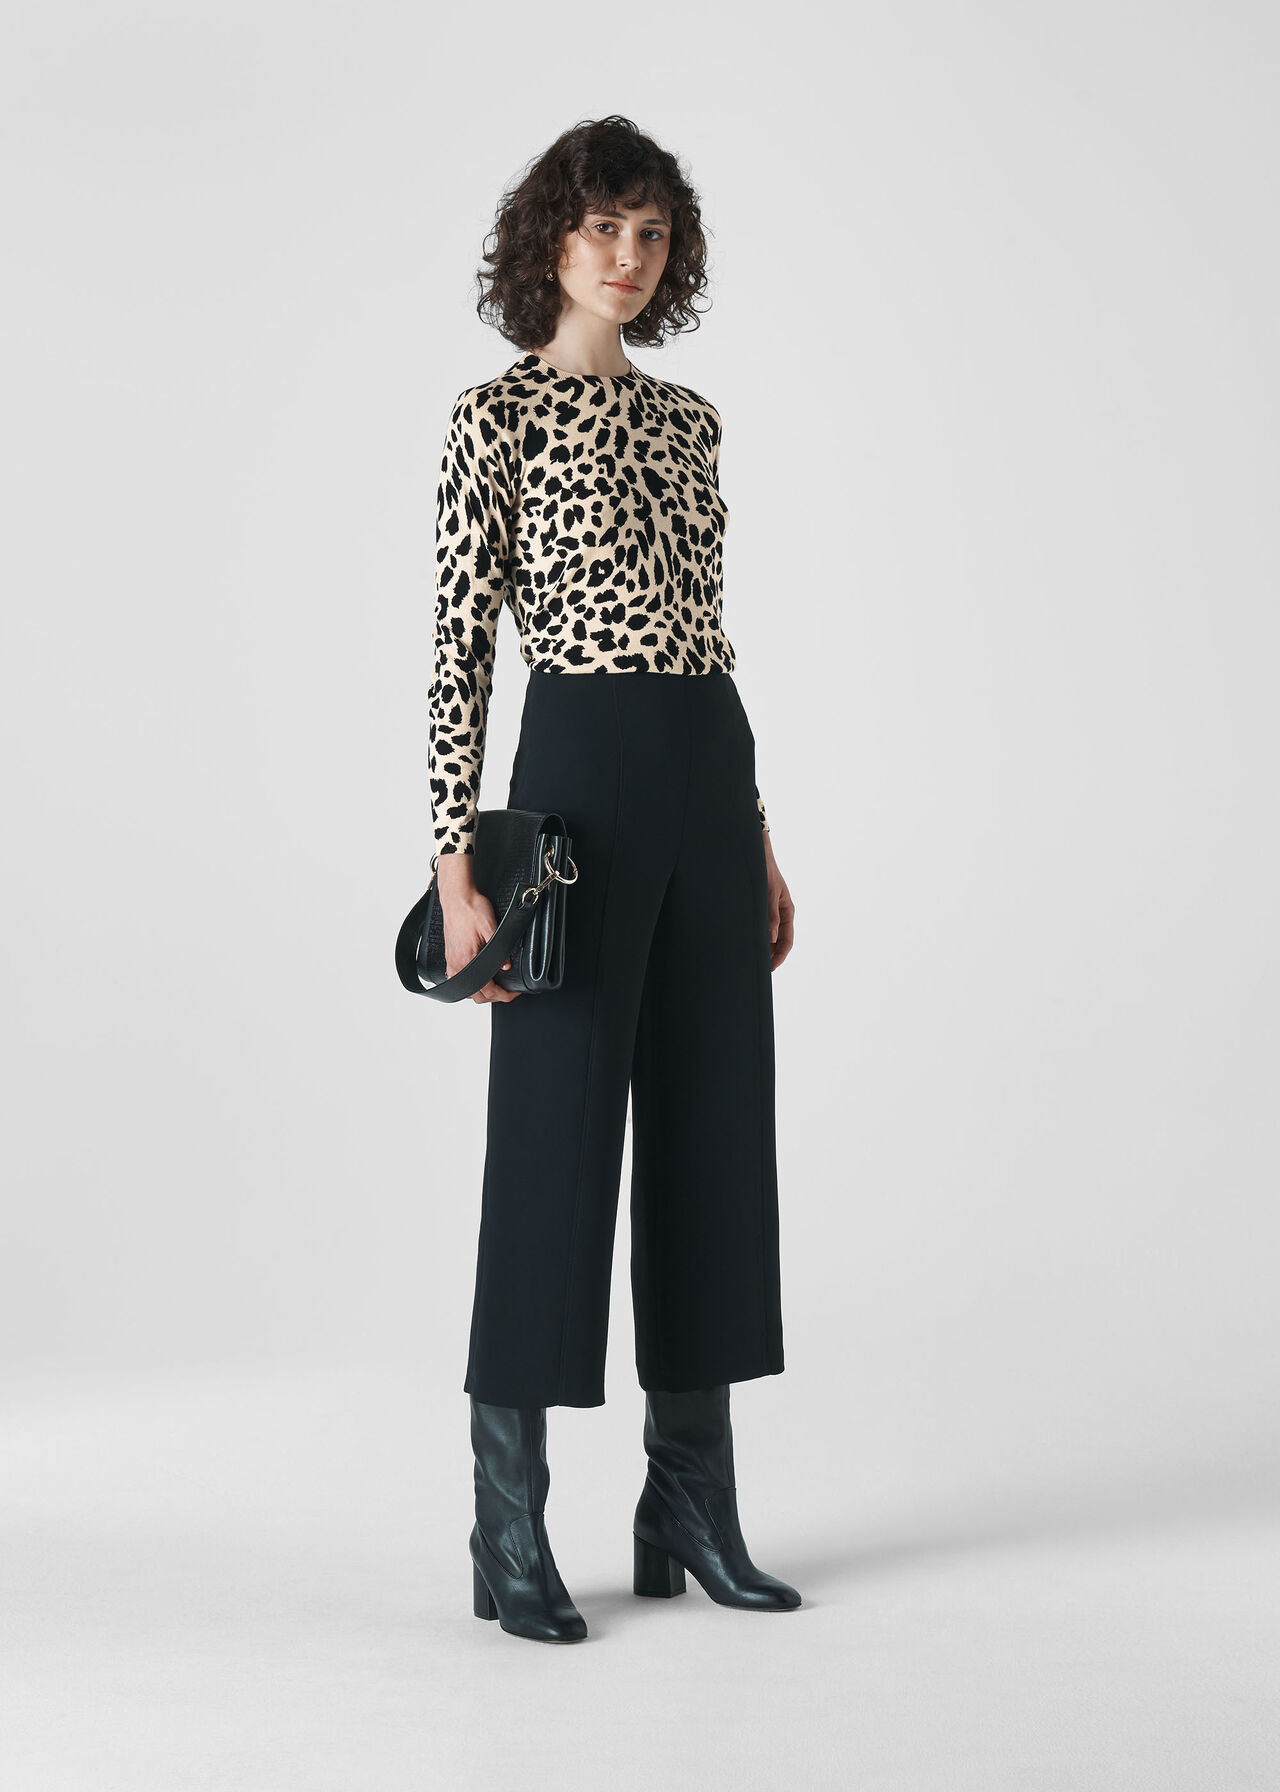 Leopard Print Brushed Cheetah Crew Neck Knit | WHISTLES